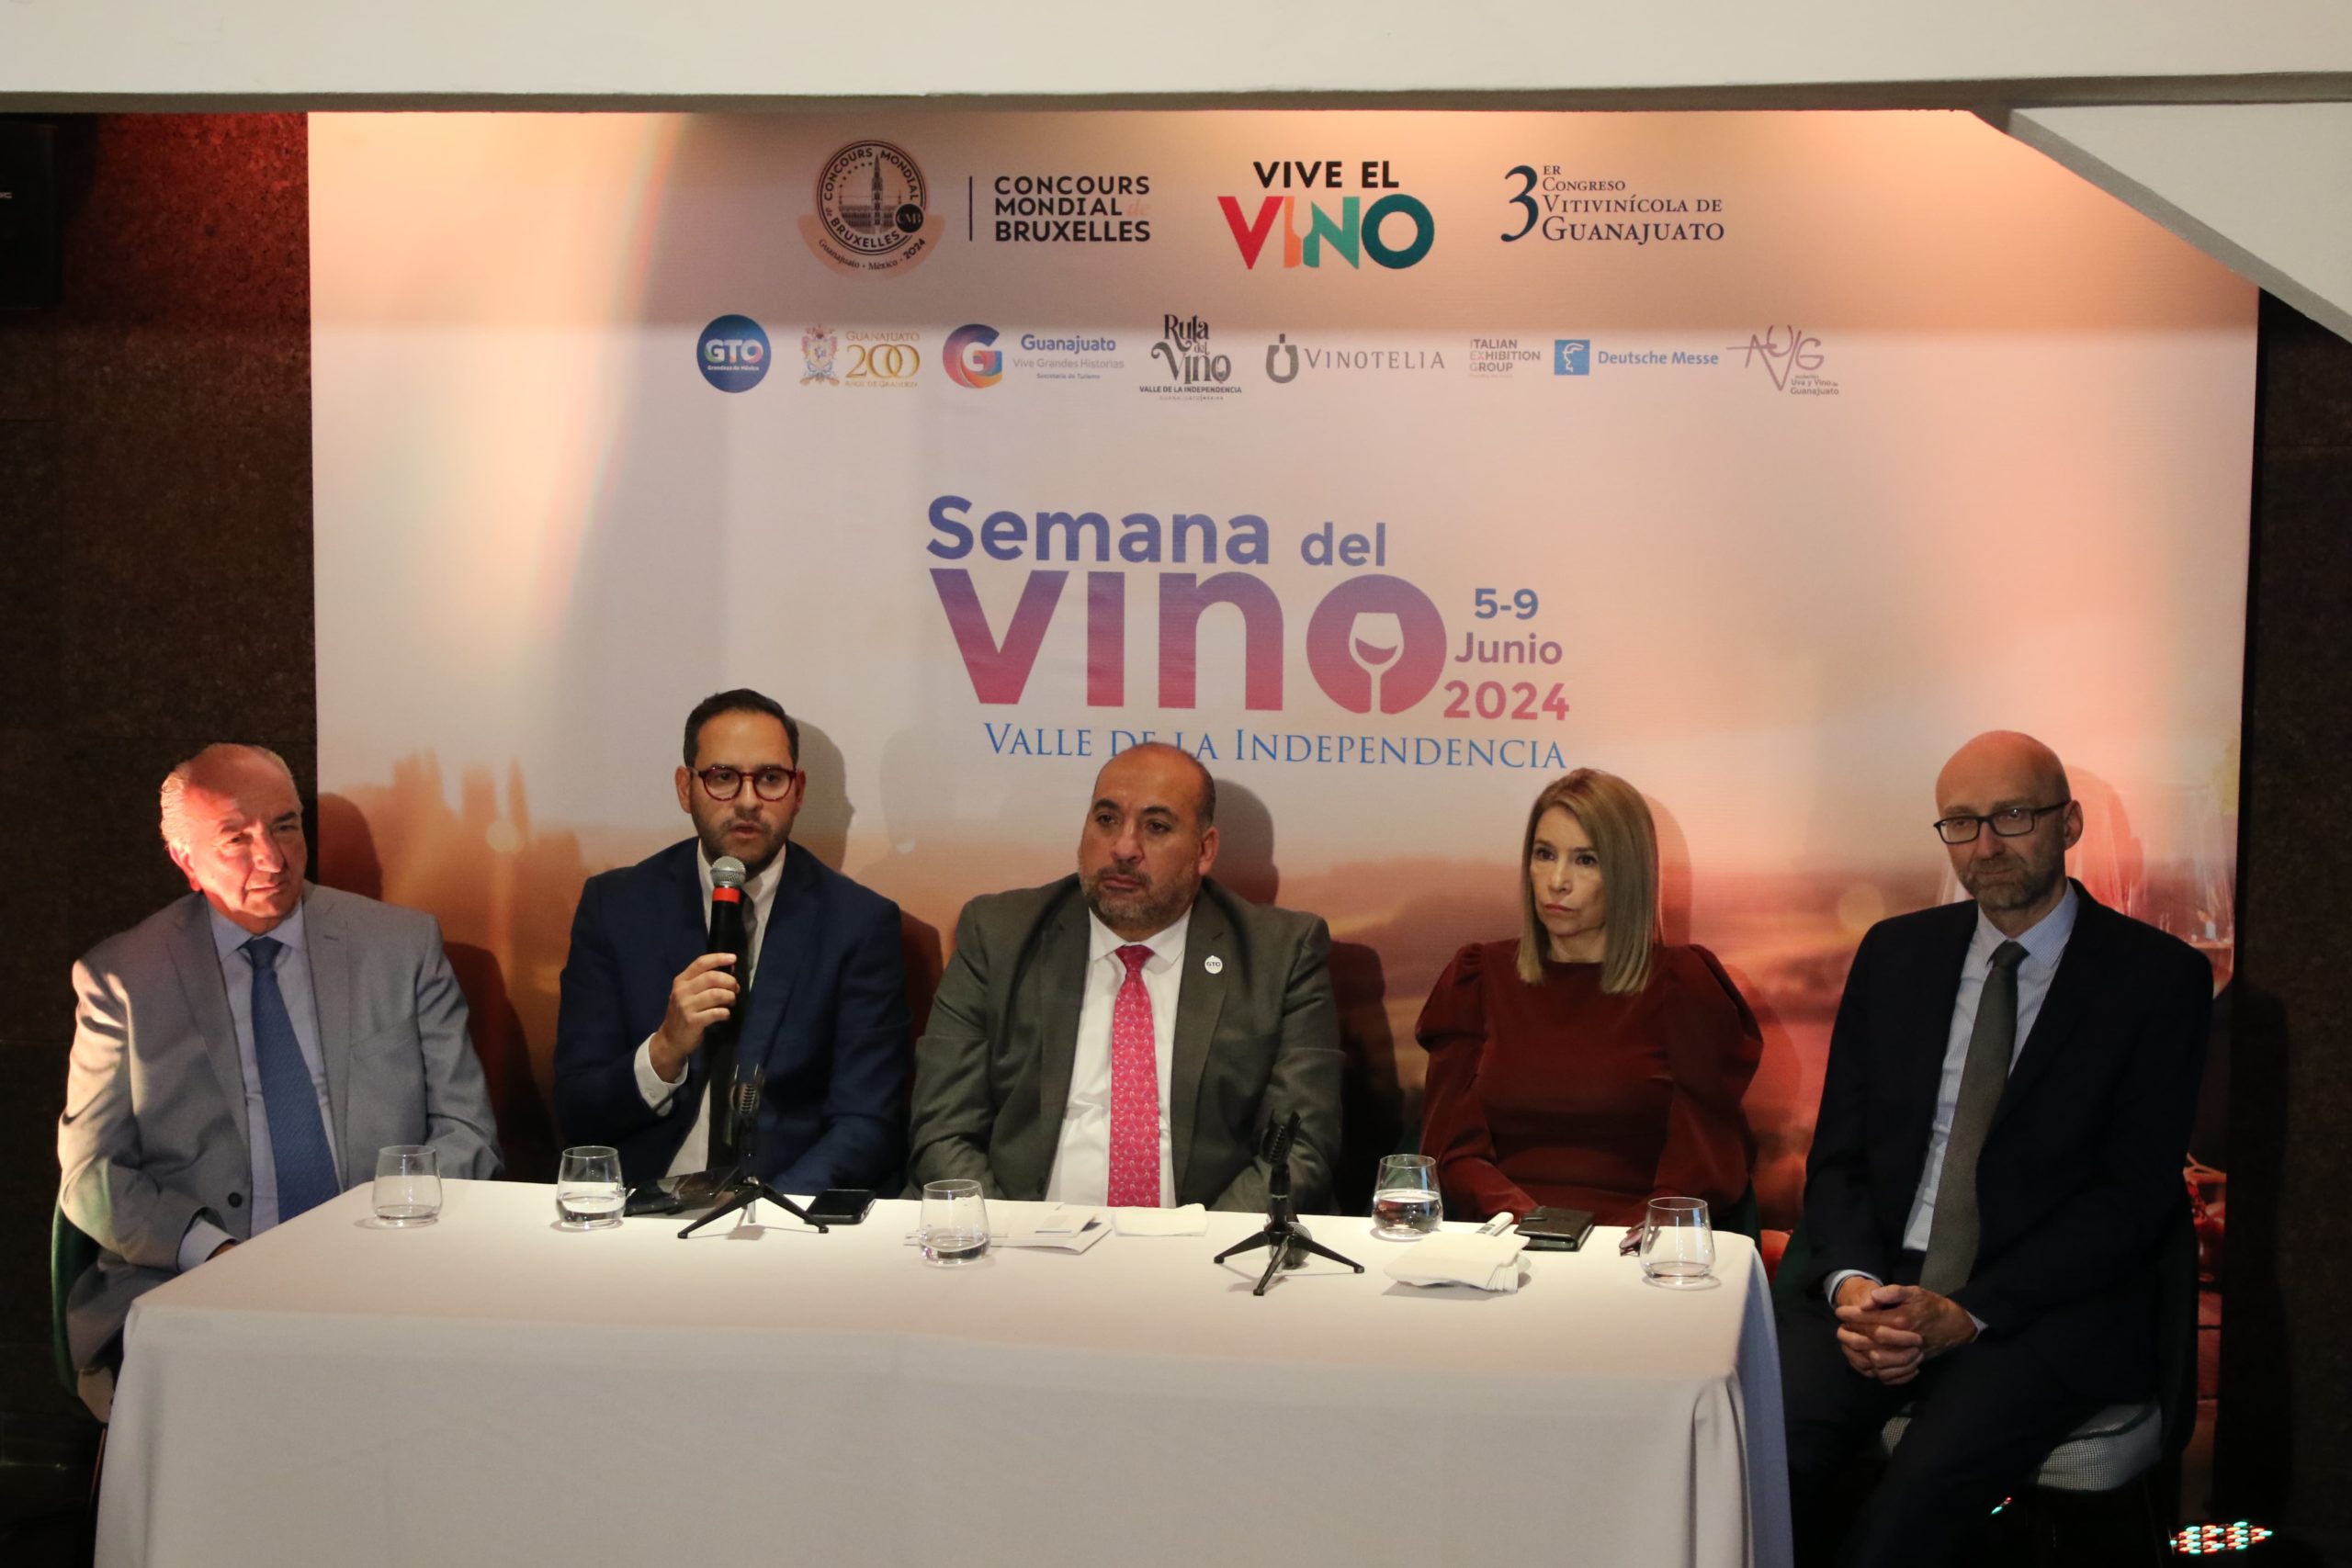 Guanajuato presents the “2024 Wine Week”, to be held within the framework of the CMB Guanajuato 2024, the 2nd edition of ‘Vive el Vino’ & the 3rd Wine Congress of the State